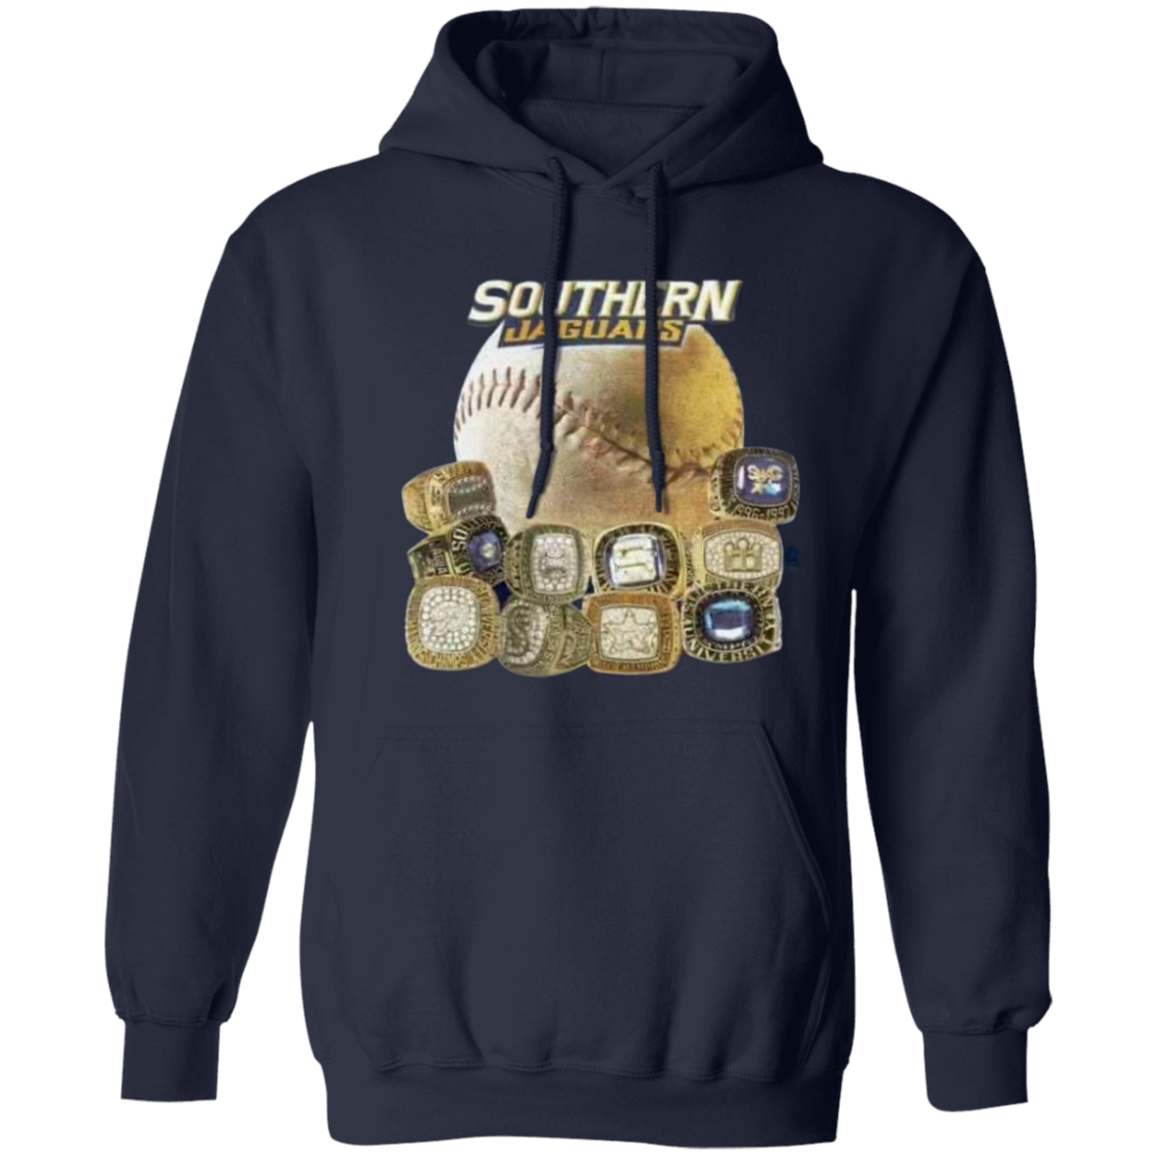 SU Baseball SWAC (Southern Wins Another Championship)  Rings Z66x Pullover Hoodie 8 oz (Closeout)